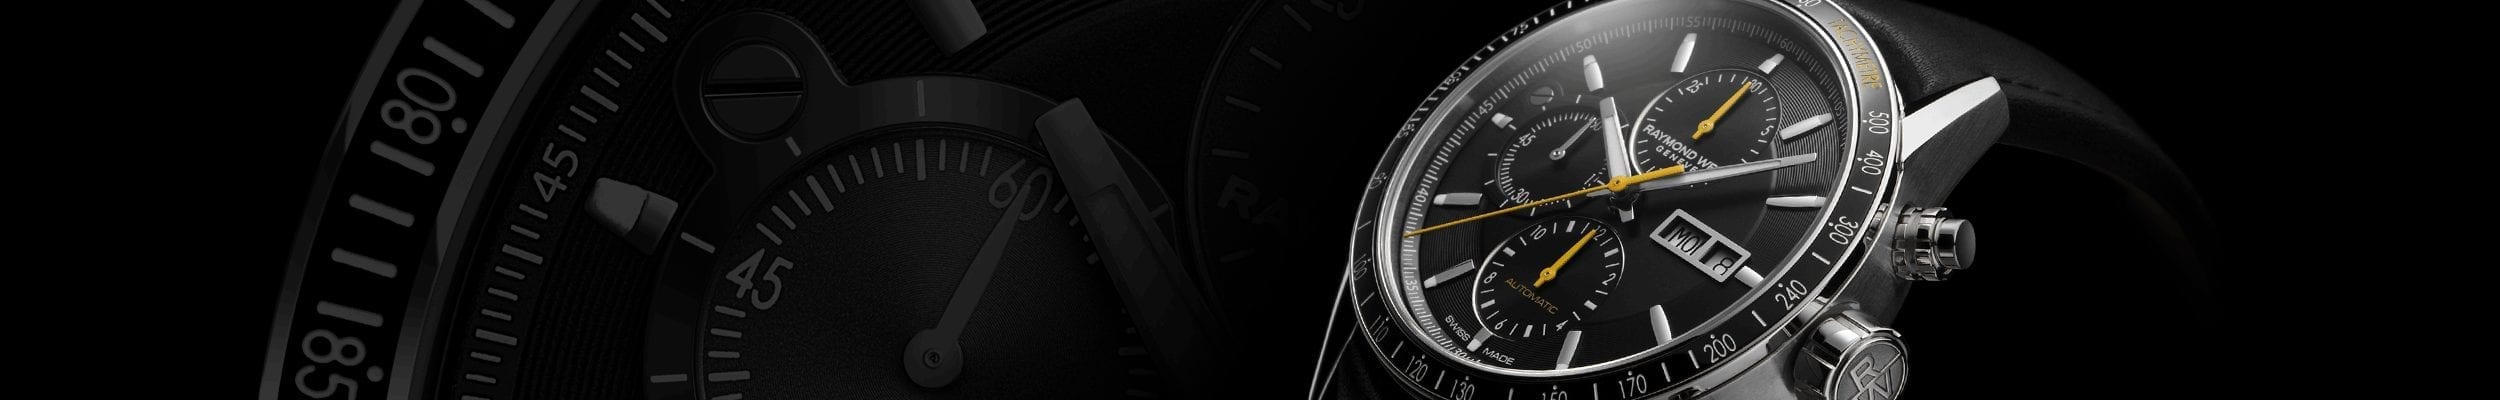 Banner image for Freelancer Chronograph page